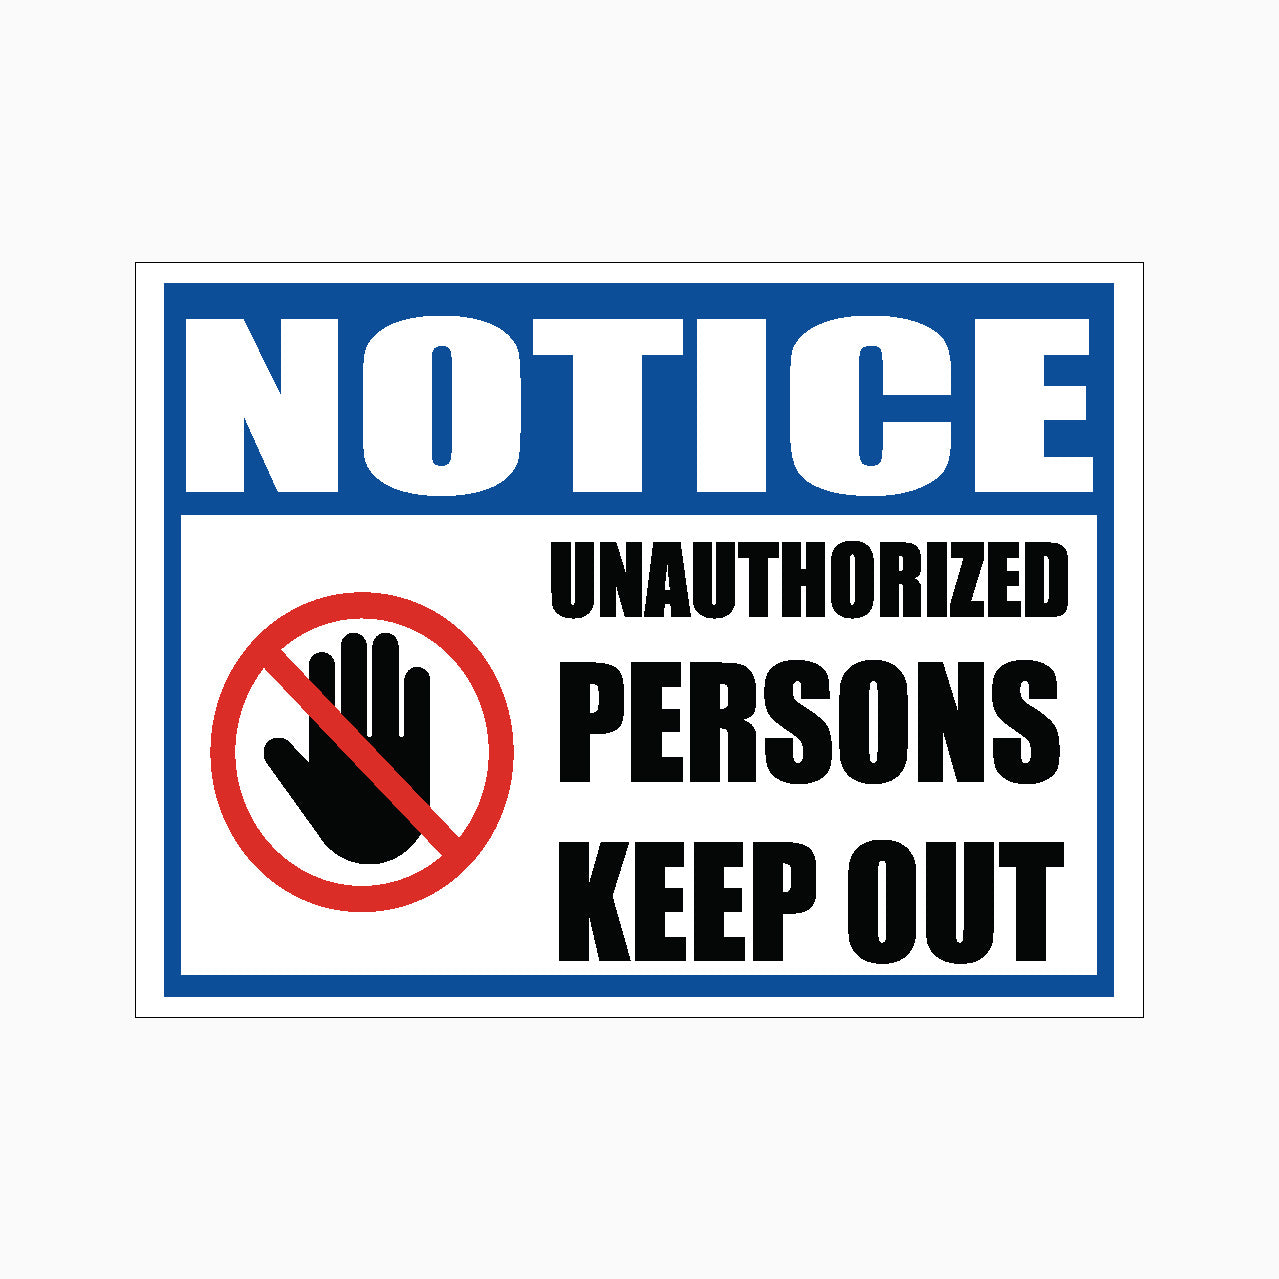 UNAUTHORIZED PERSONS KEEP OUT SIGN